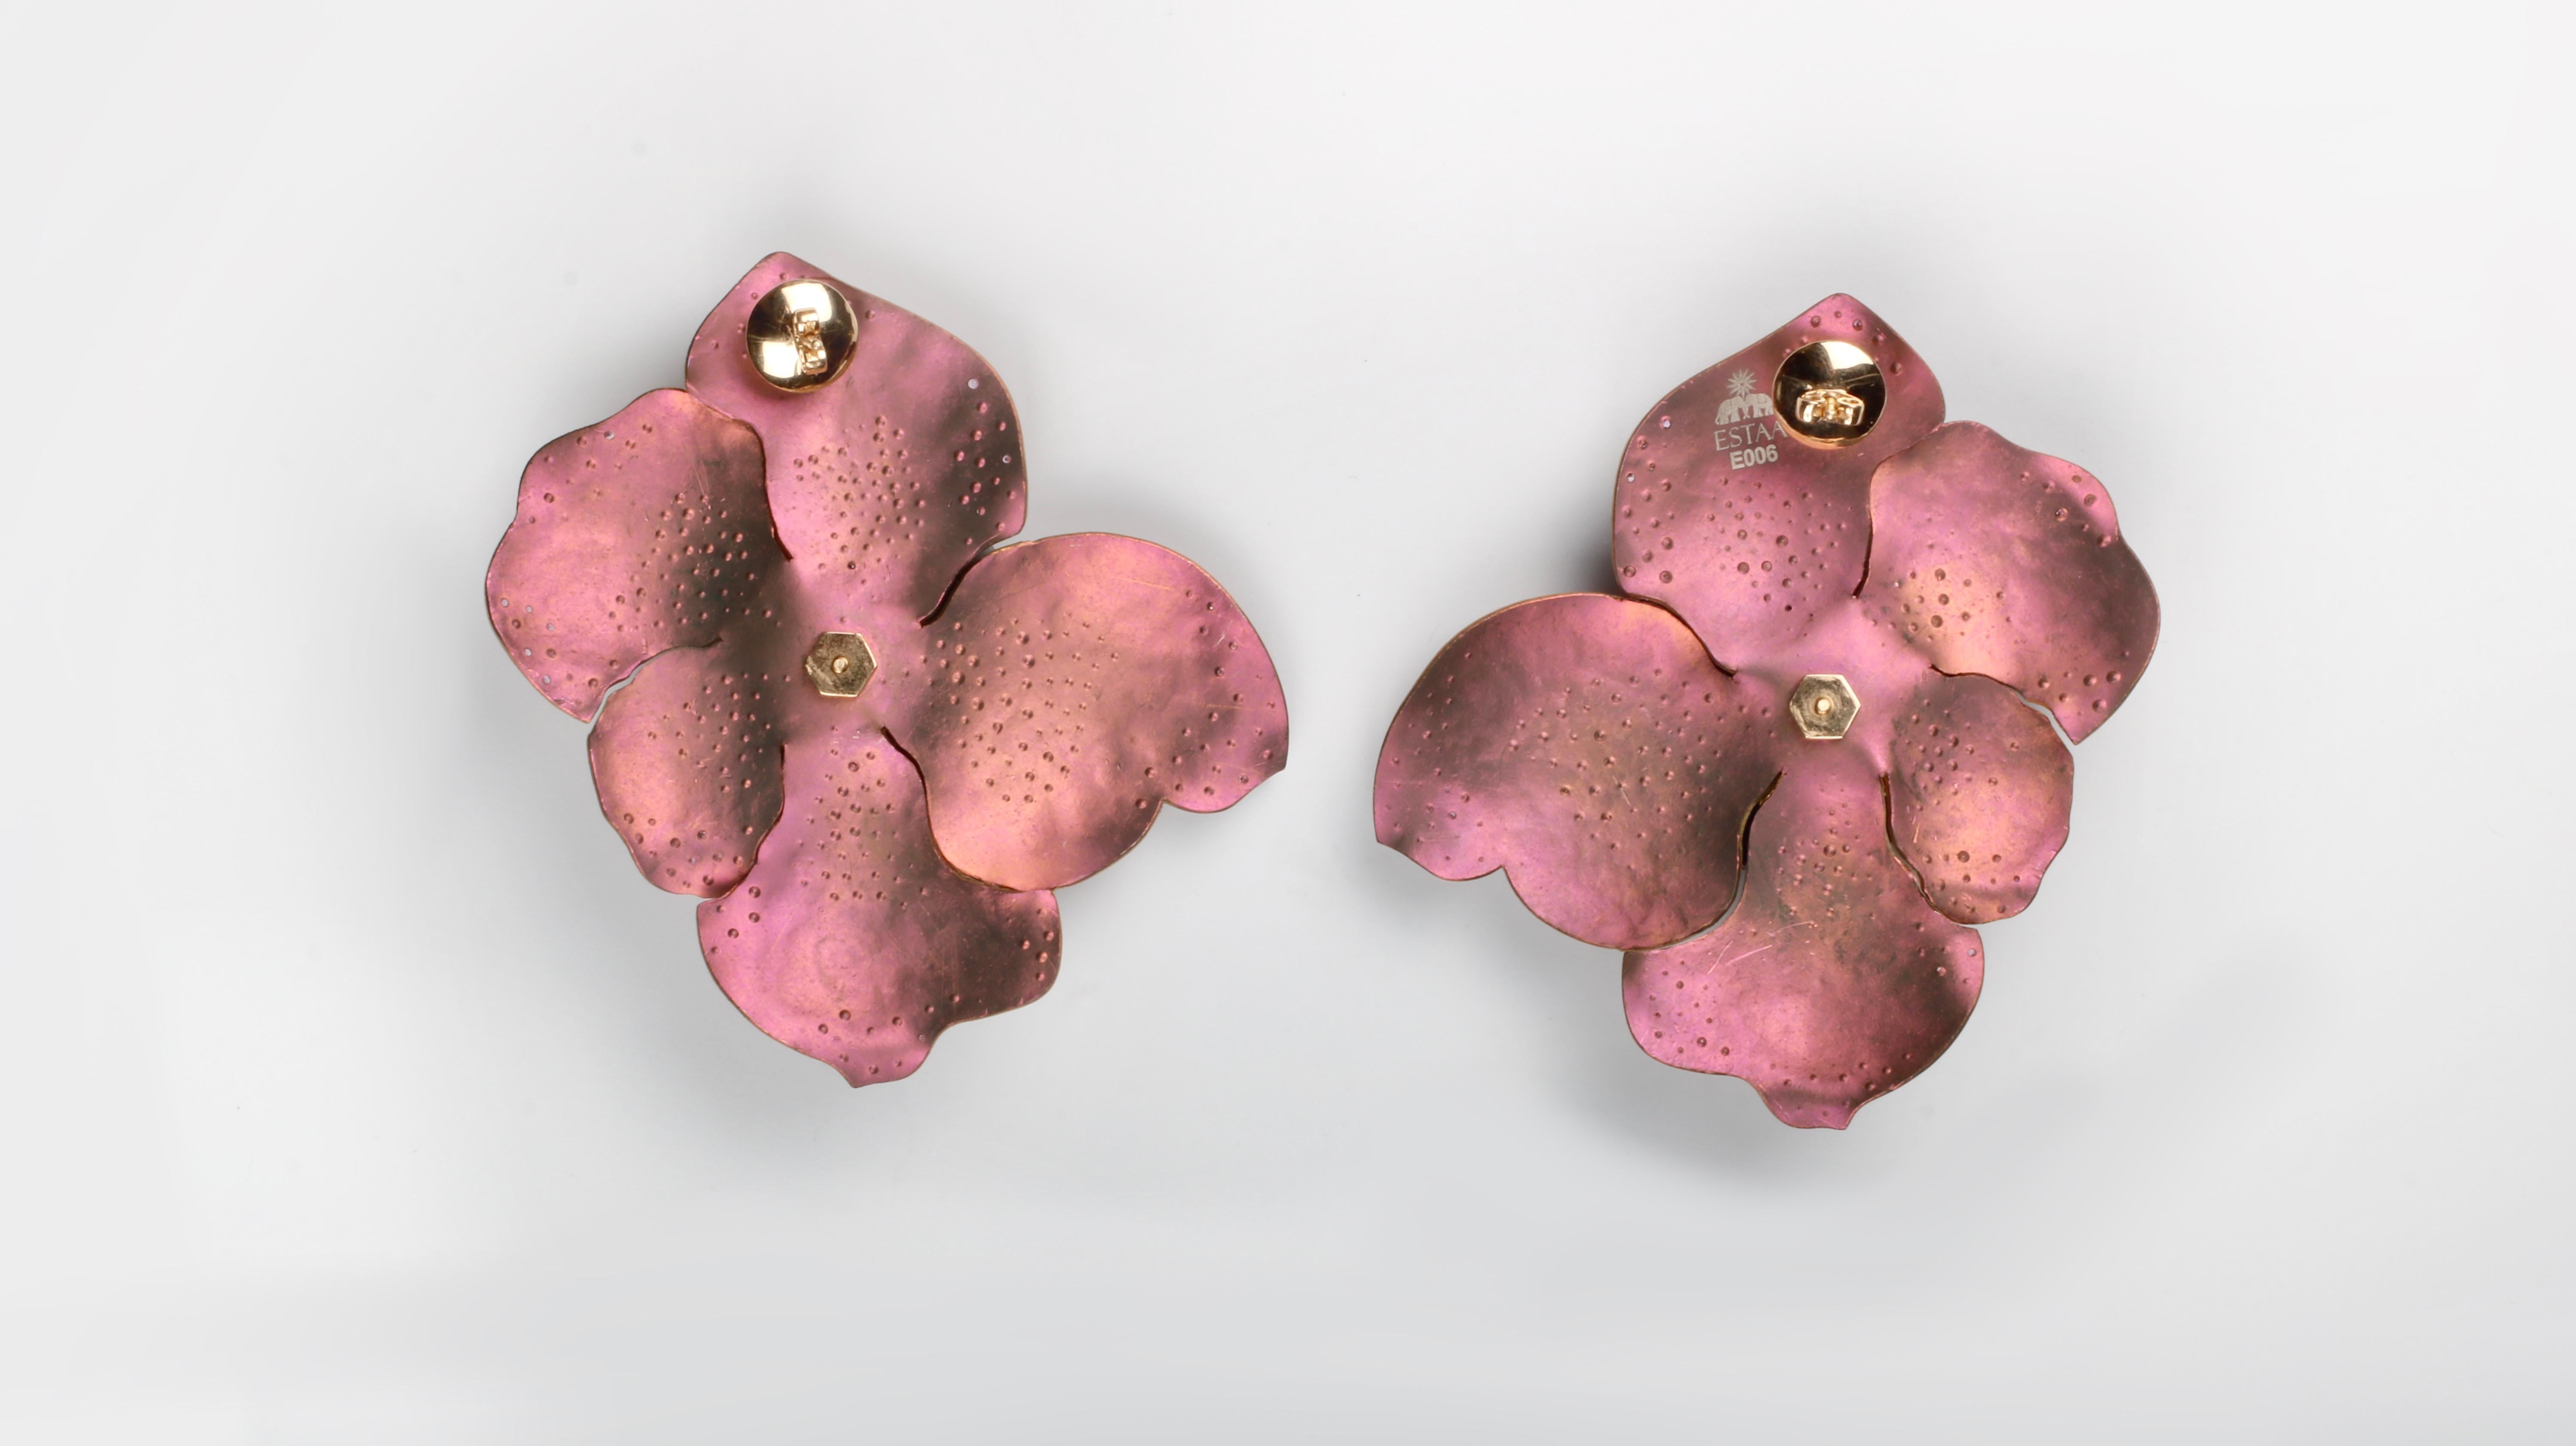 HANDCRAFTED GOLD ROSE TITANIUM EARRINGS WITH 18KT GOLD.
18kt Gold Backs. 
3.76 carats of Diamonds
6.48 carats of Pink Tourmalines
4.46 carats of Pink Sapphires
